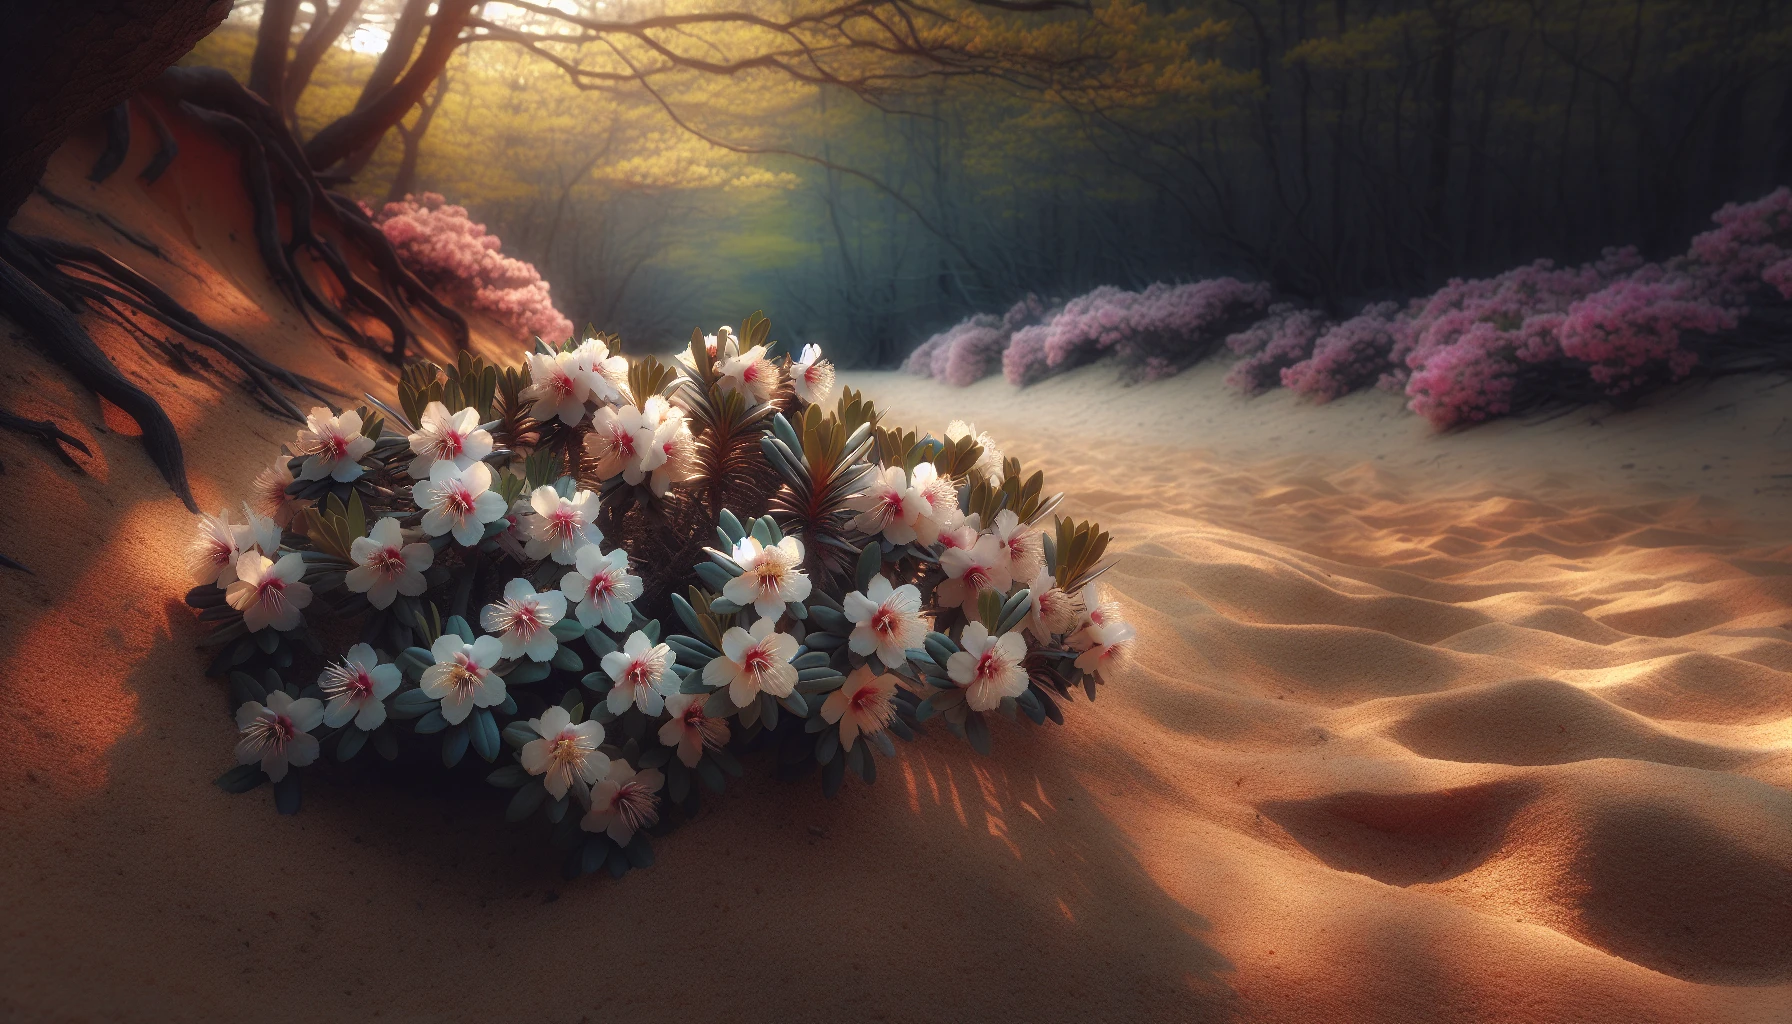 Trailing arbutus flowers in a sandy soil environment